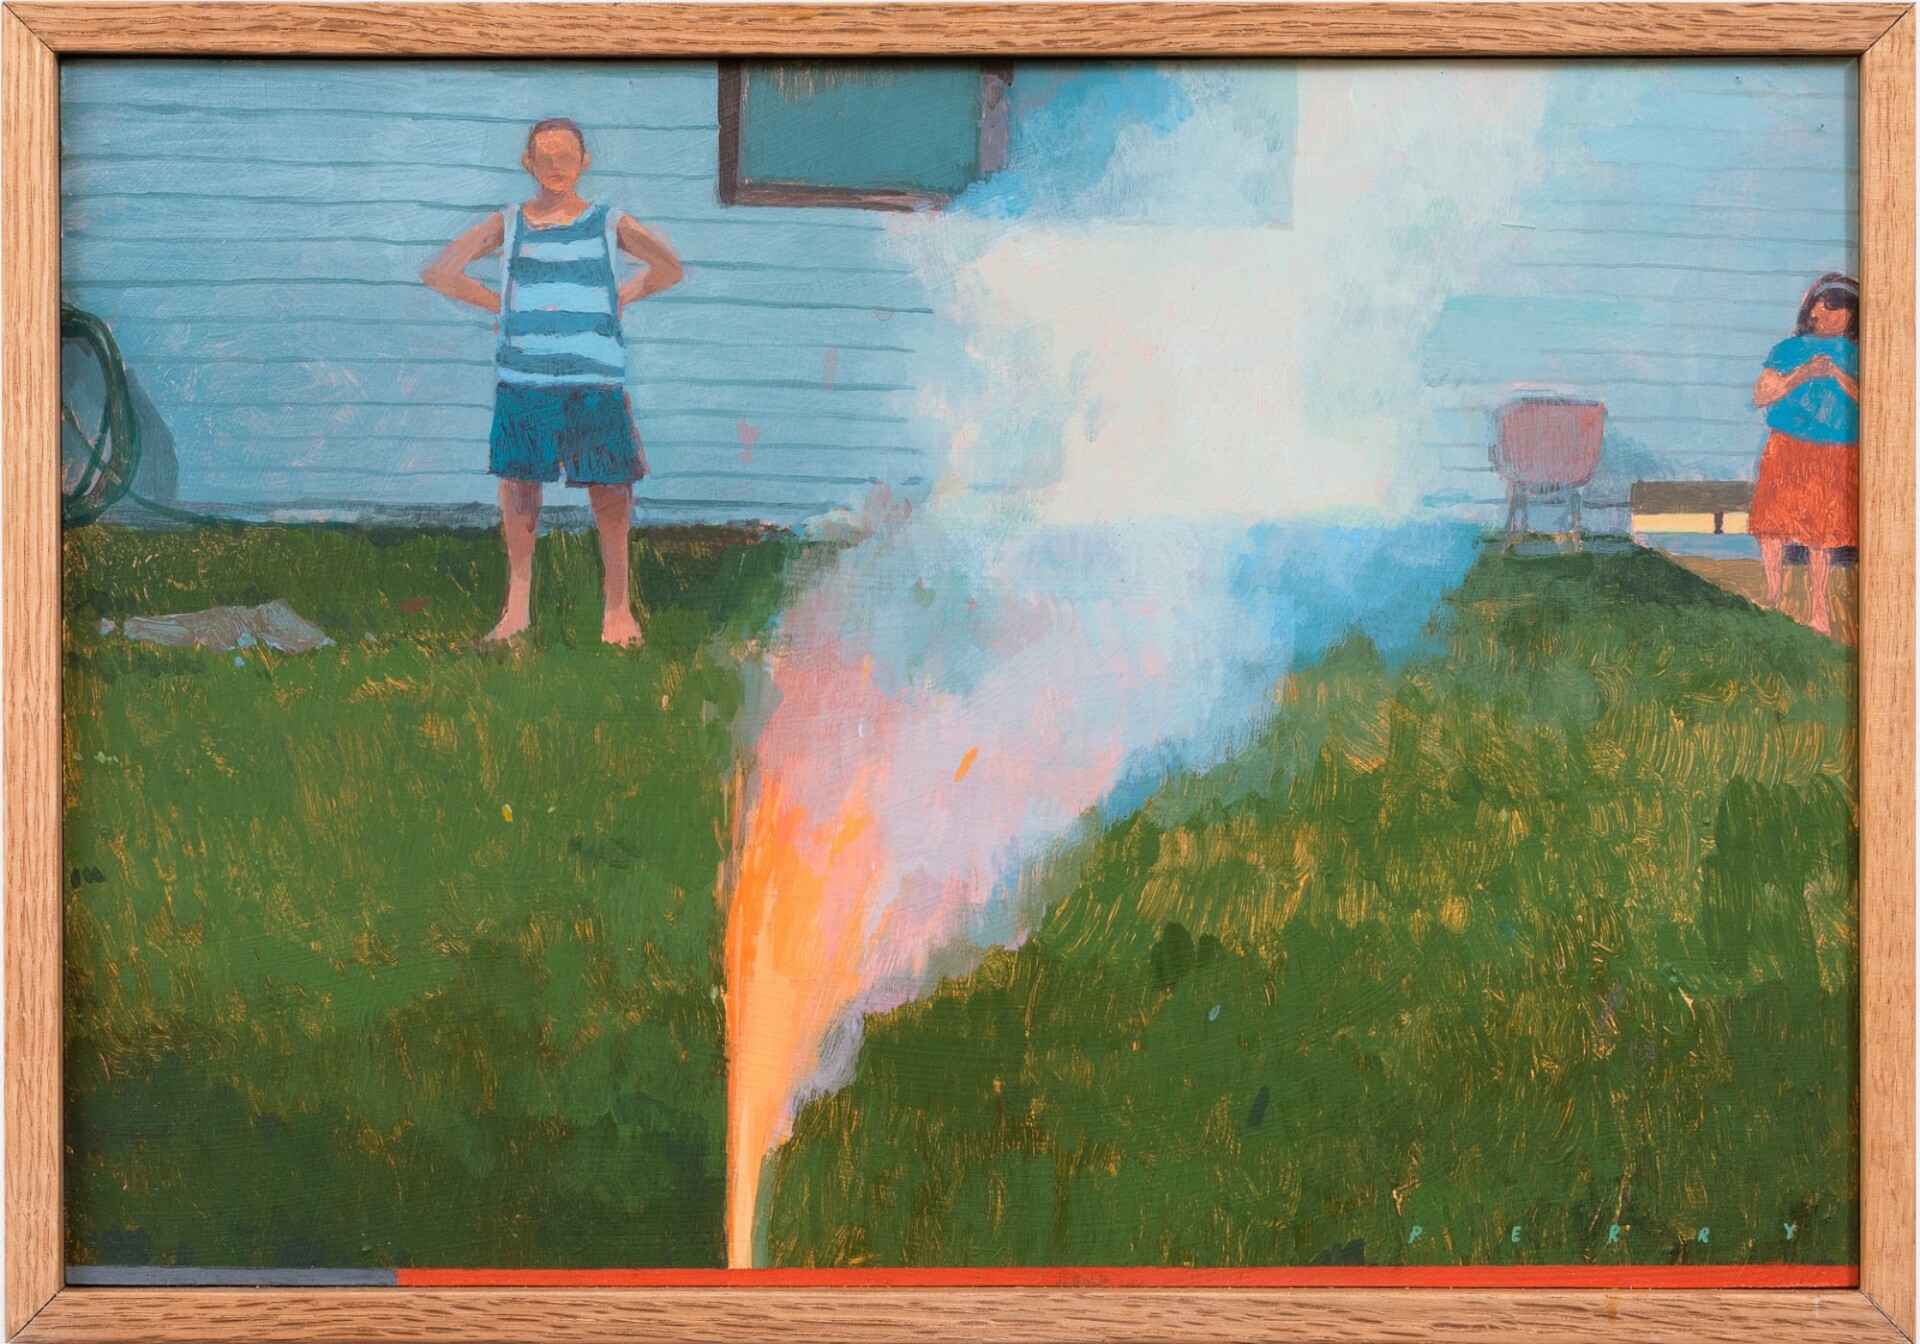 Pat Perry Frames the Earnest and Eerie Moments of Midwestern Life in ‘Which World’